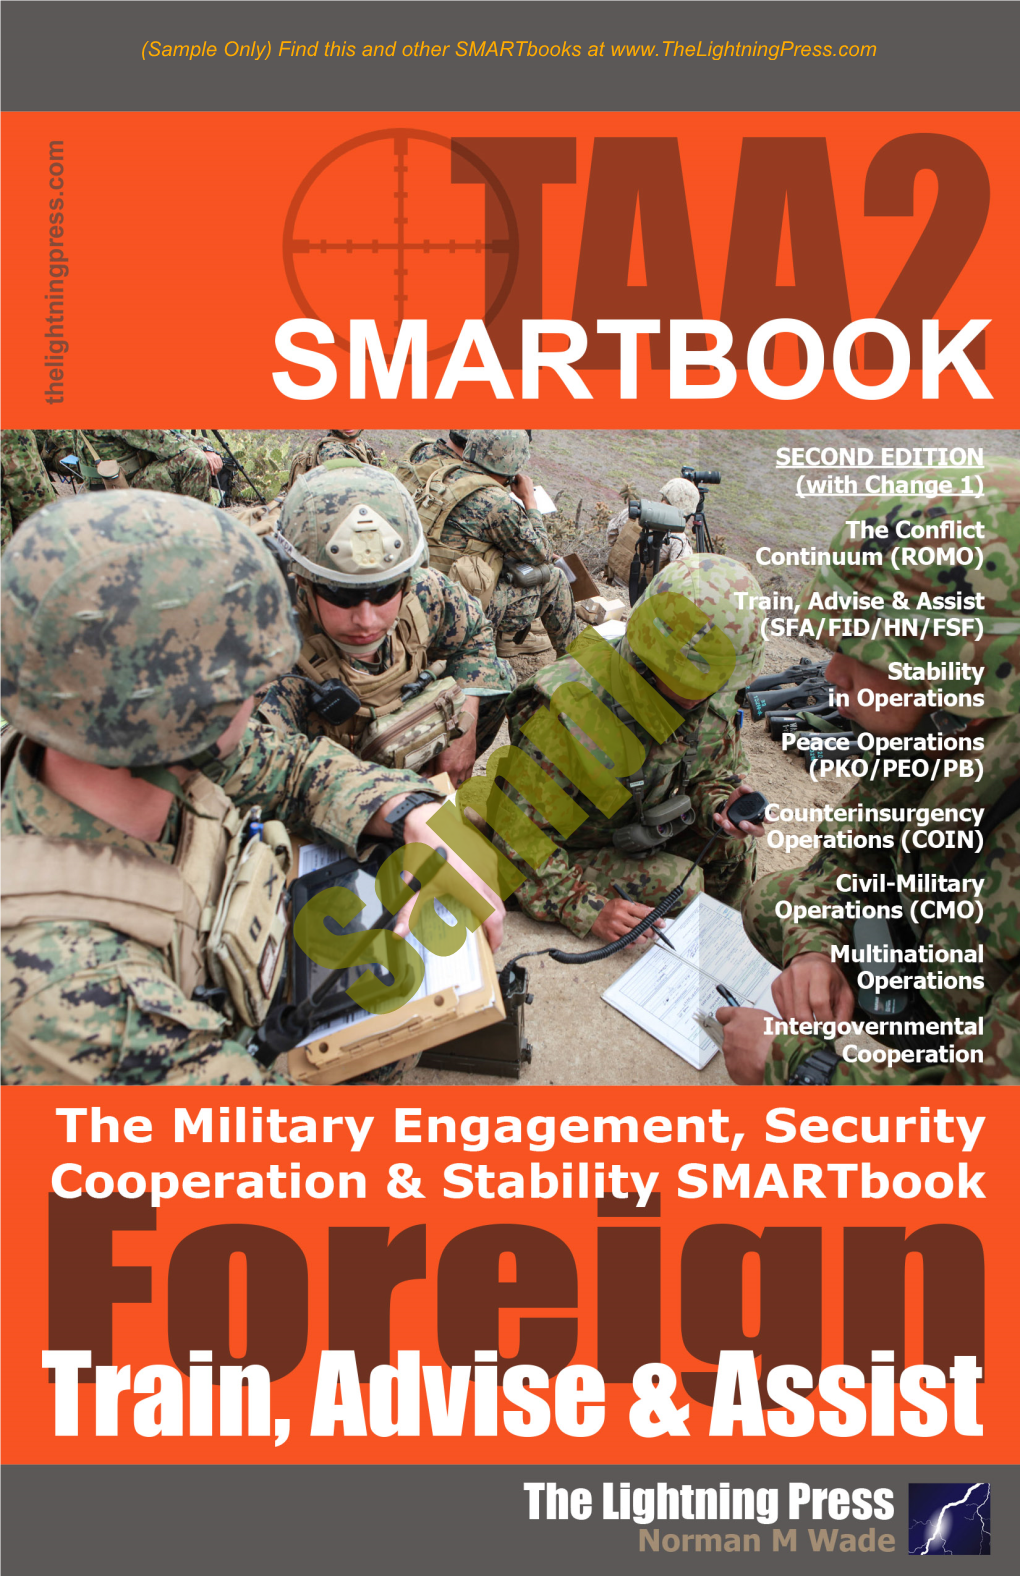 The Military Engagement, Security Cooperationsample & Stability Smartbook